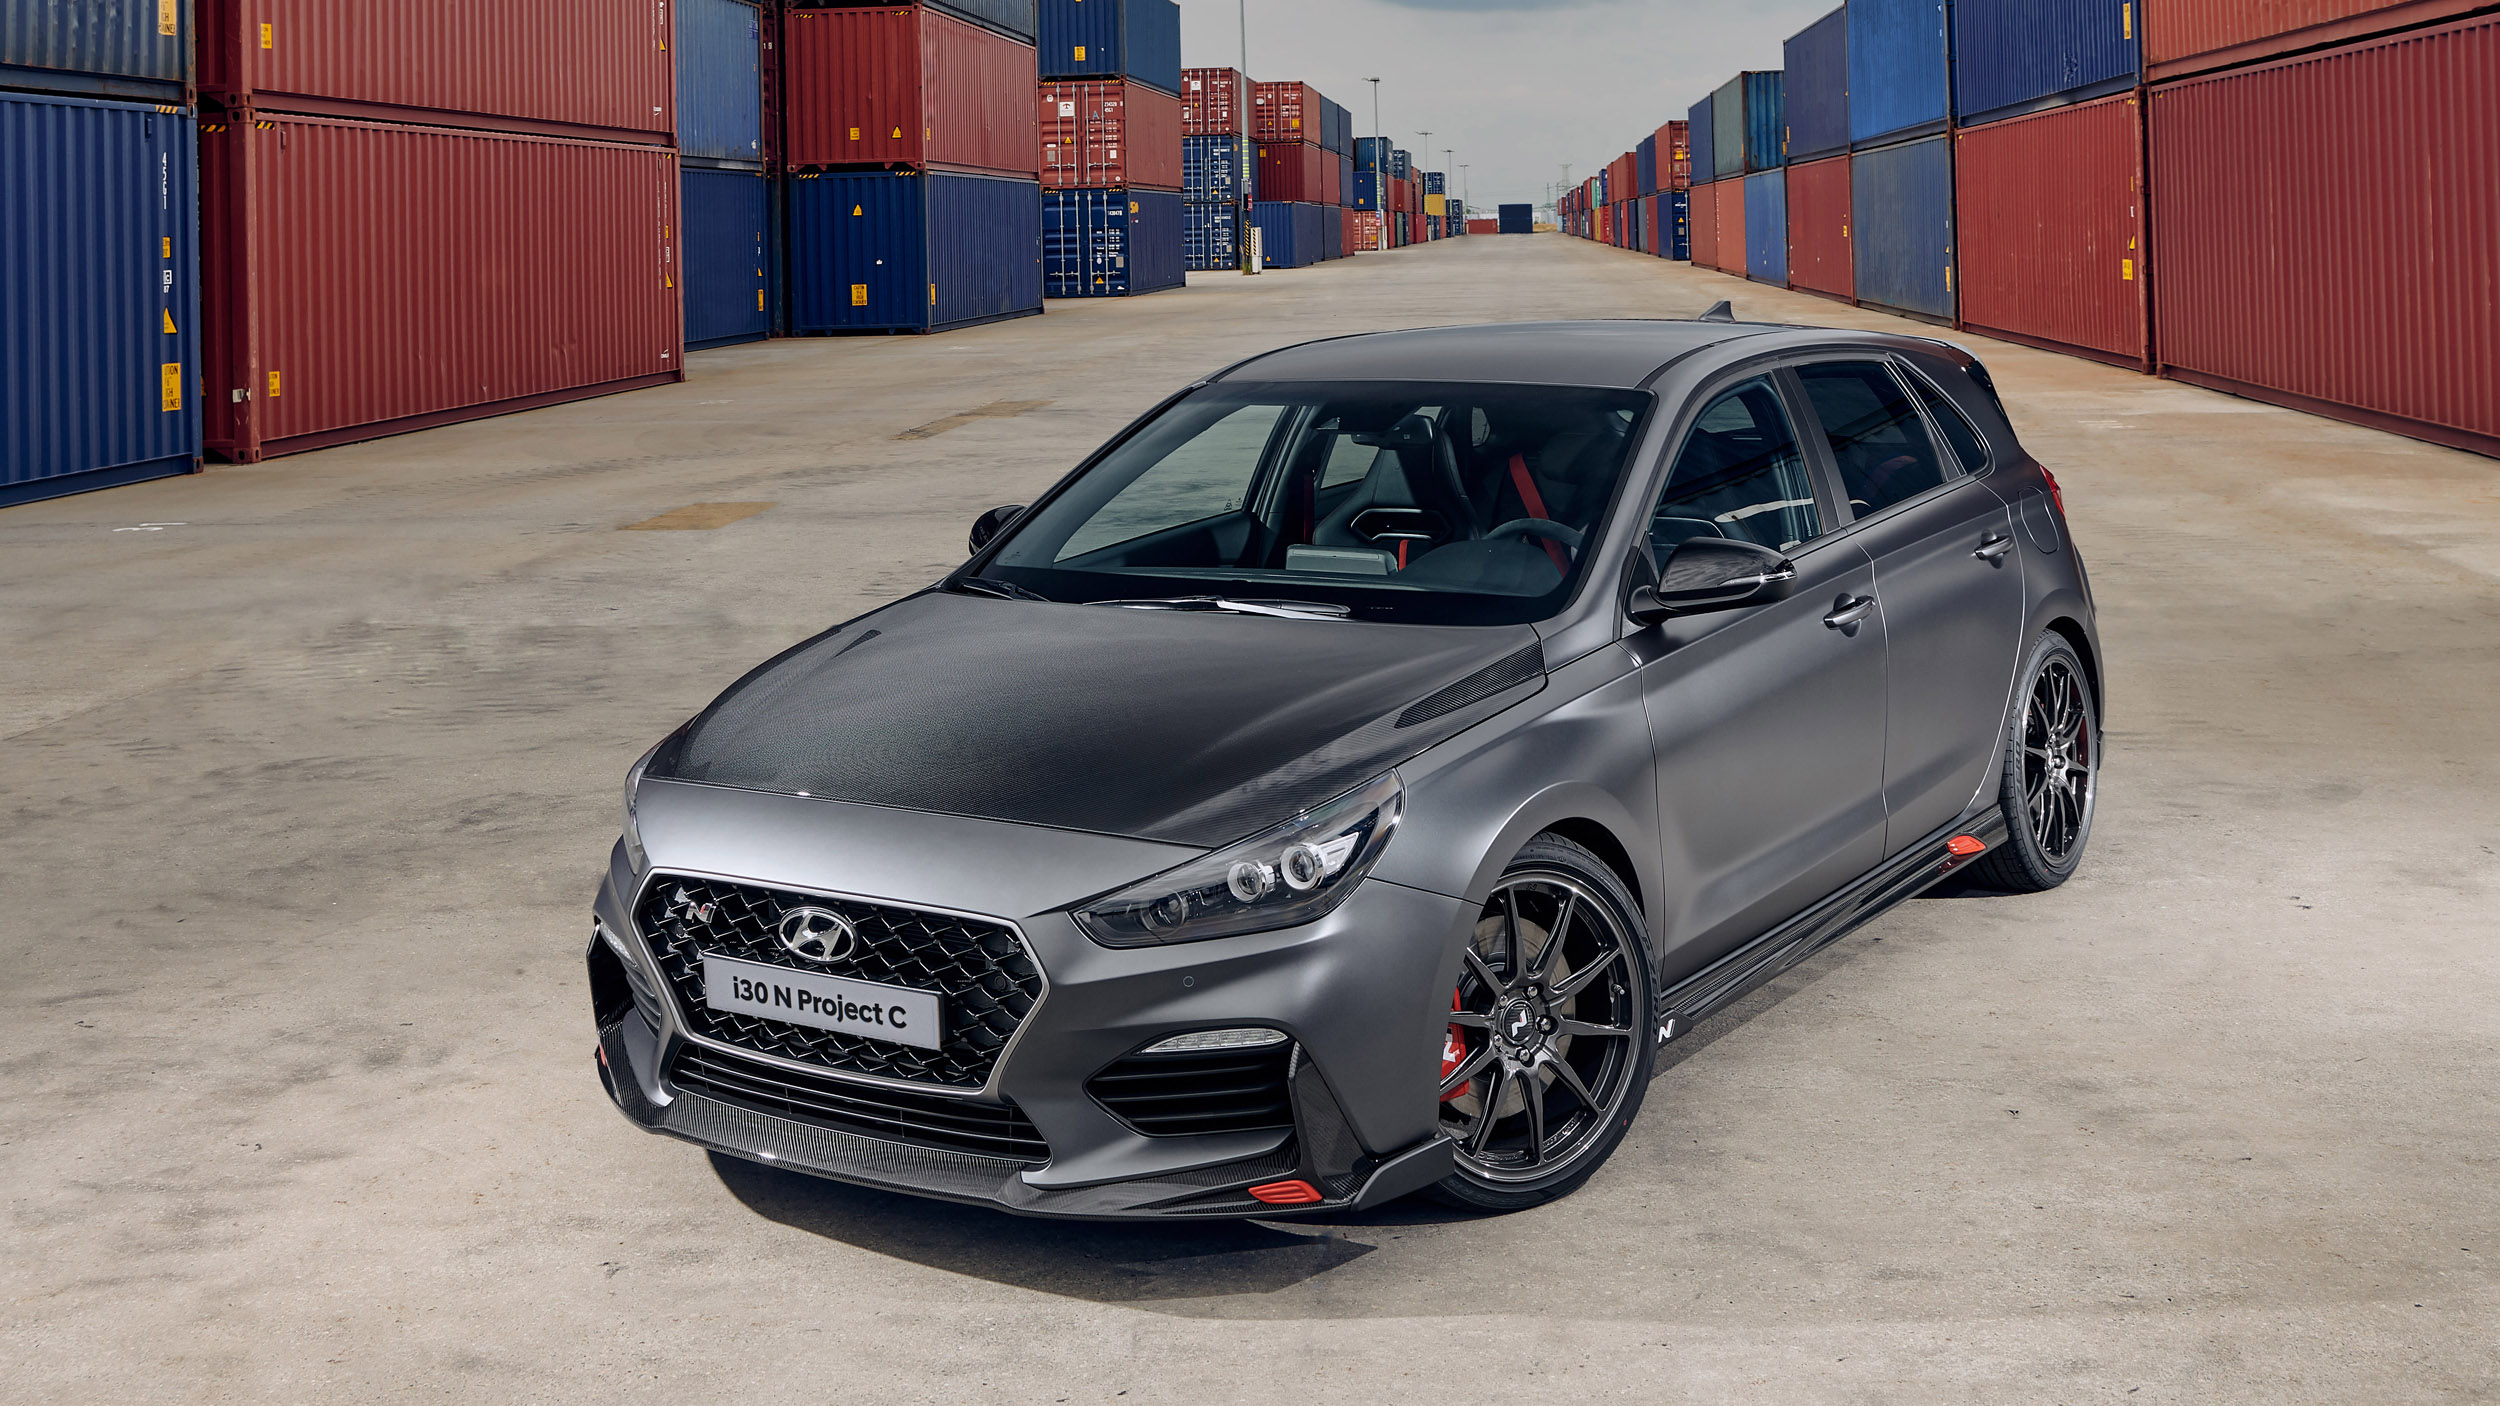 Hyundai i30 N Project C is a lighter hot hatch for Europe | Autoblog